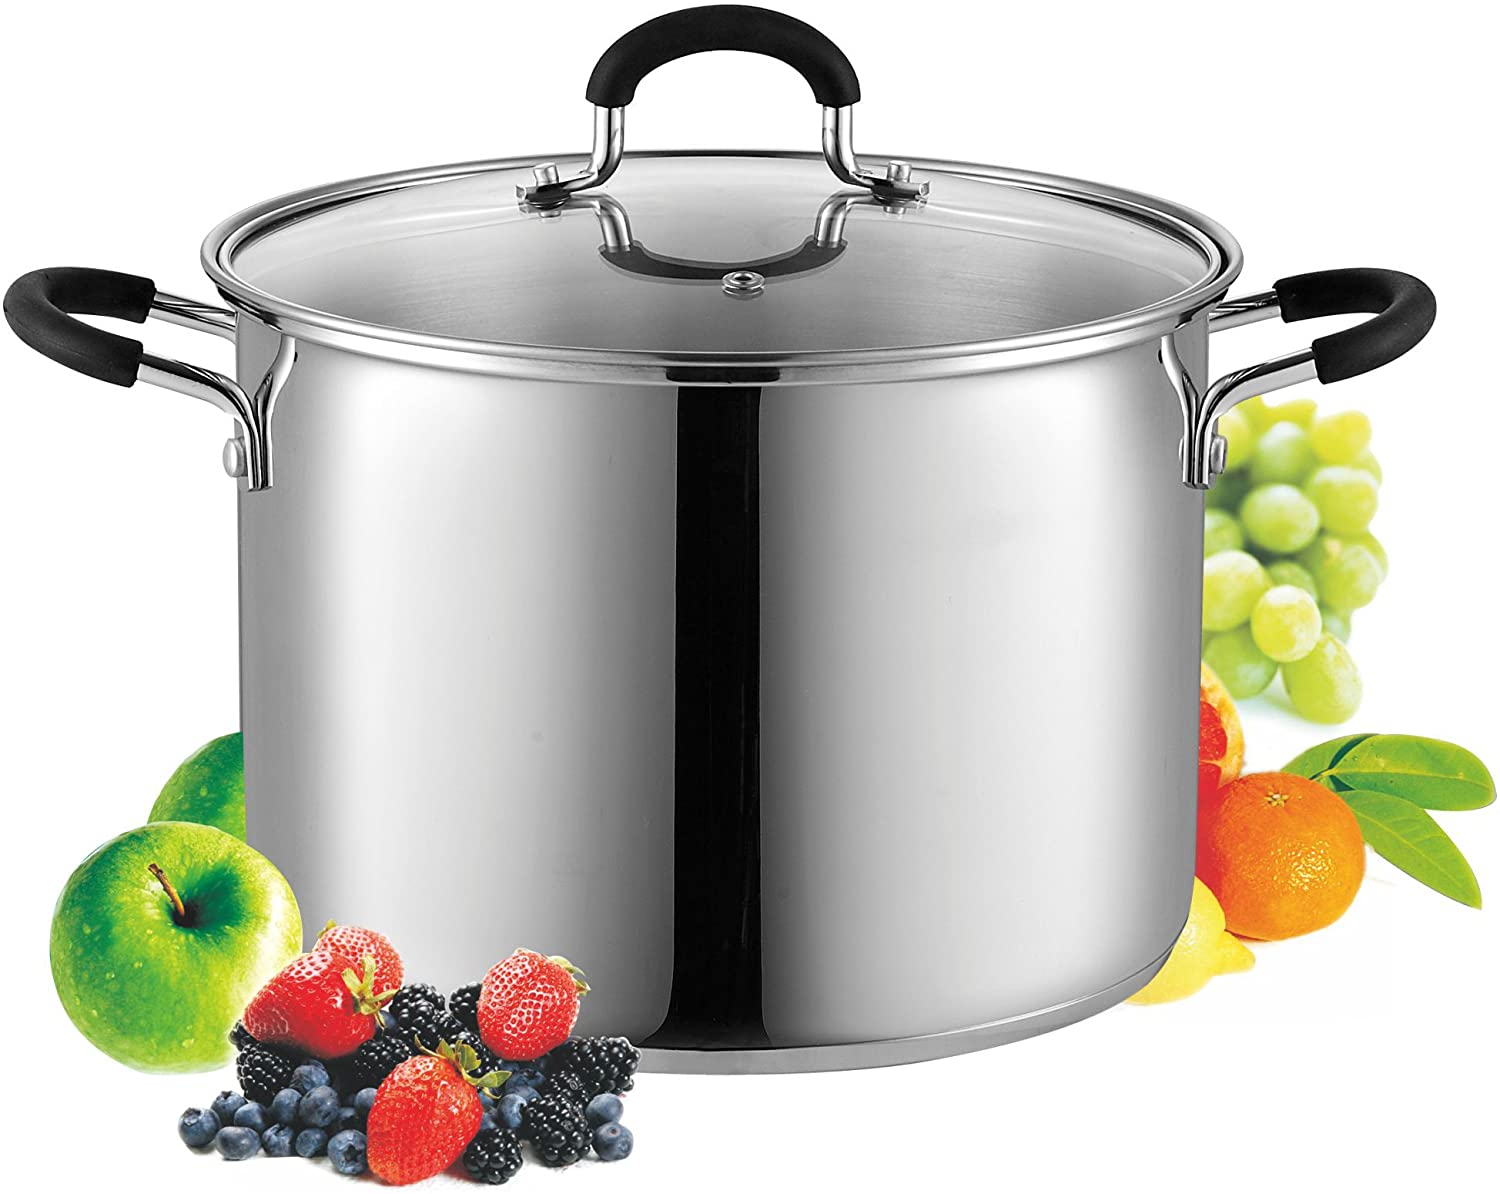 Cook N Home Stockpot Sauce Pot Induction Pot With Lid Professional Sta